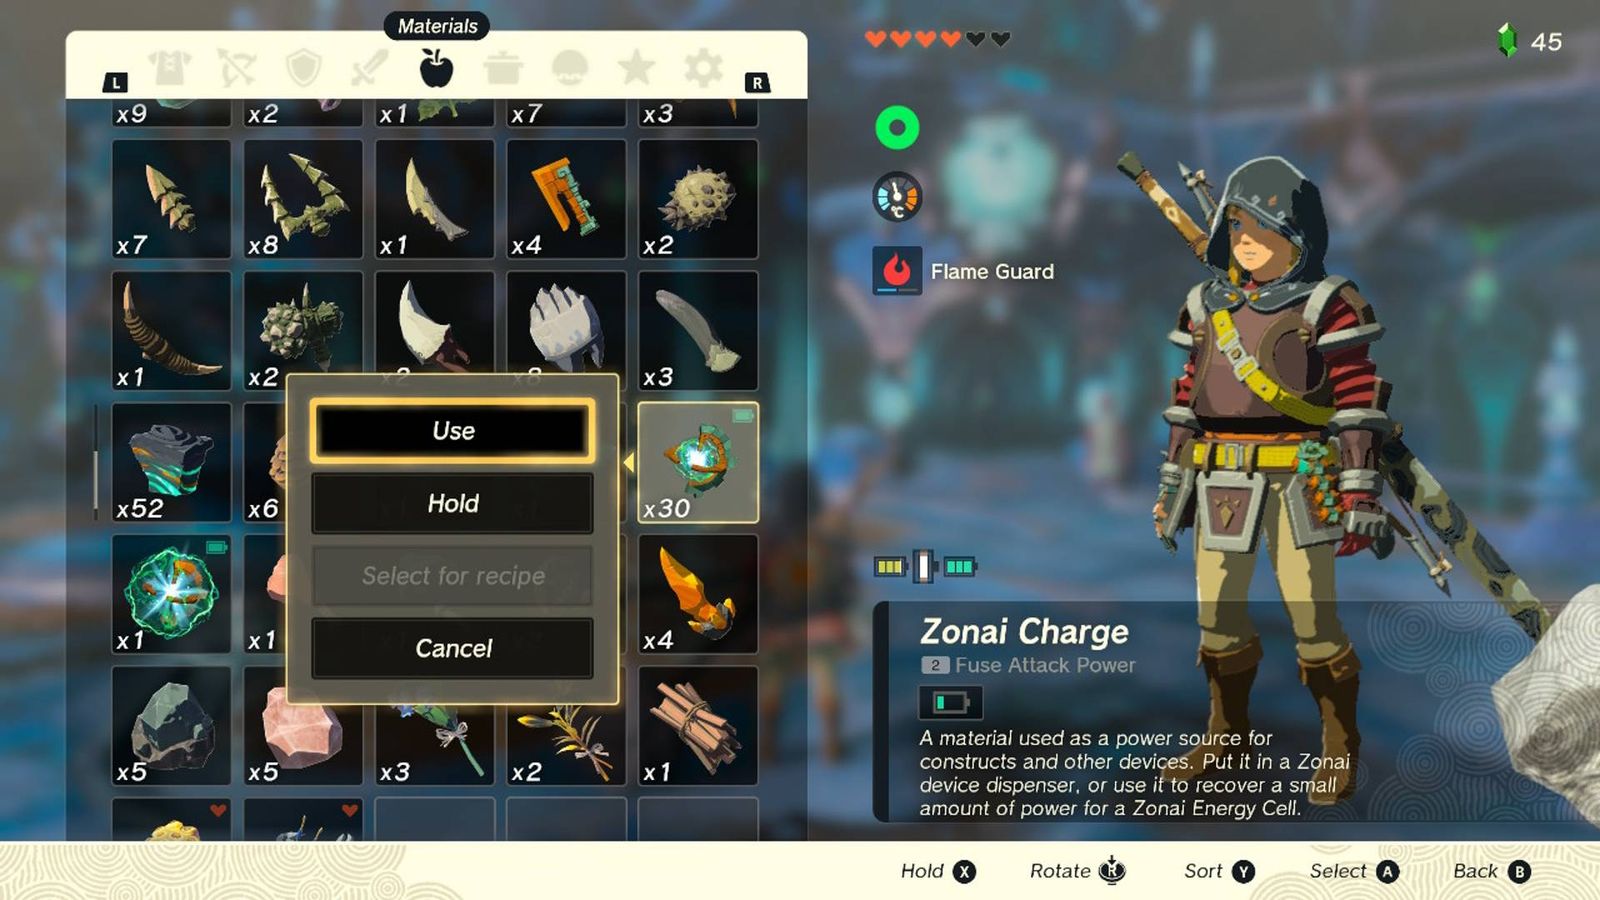 The Zonai Charges in Link's inventory in Zelda Tears of the Kingdom.